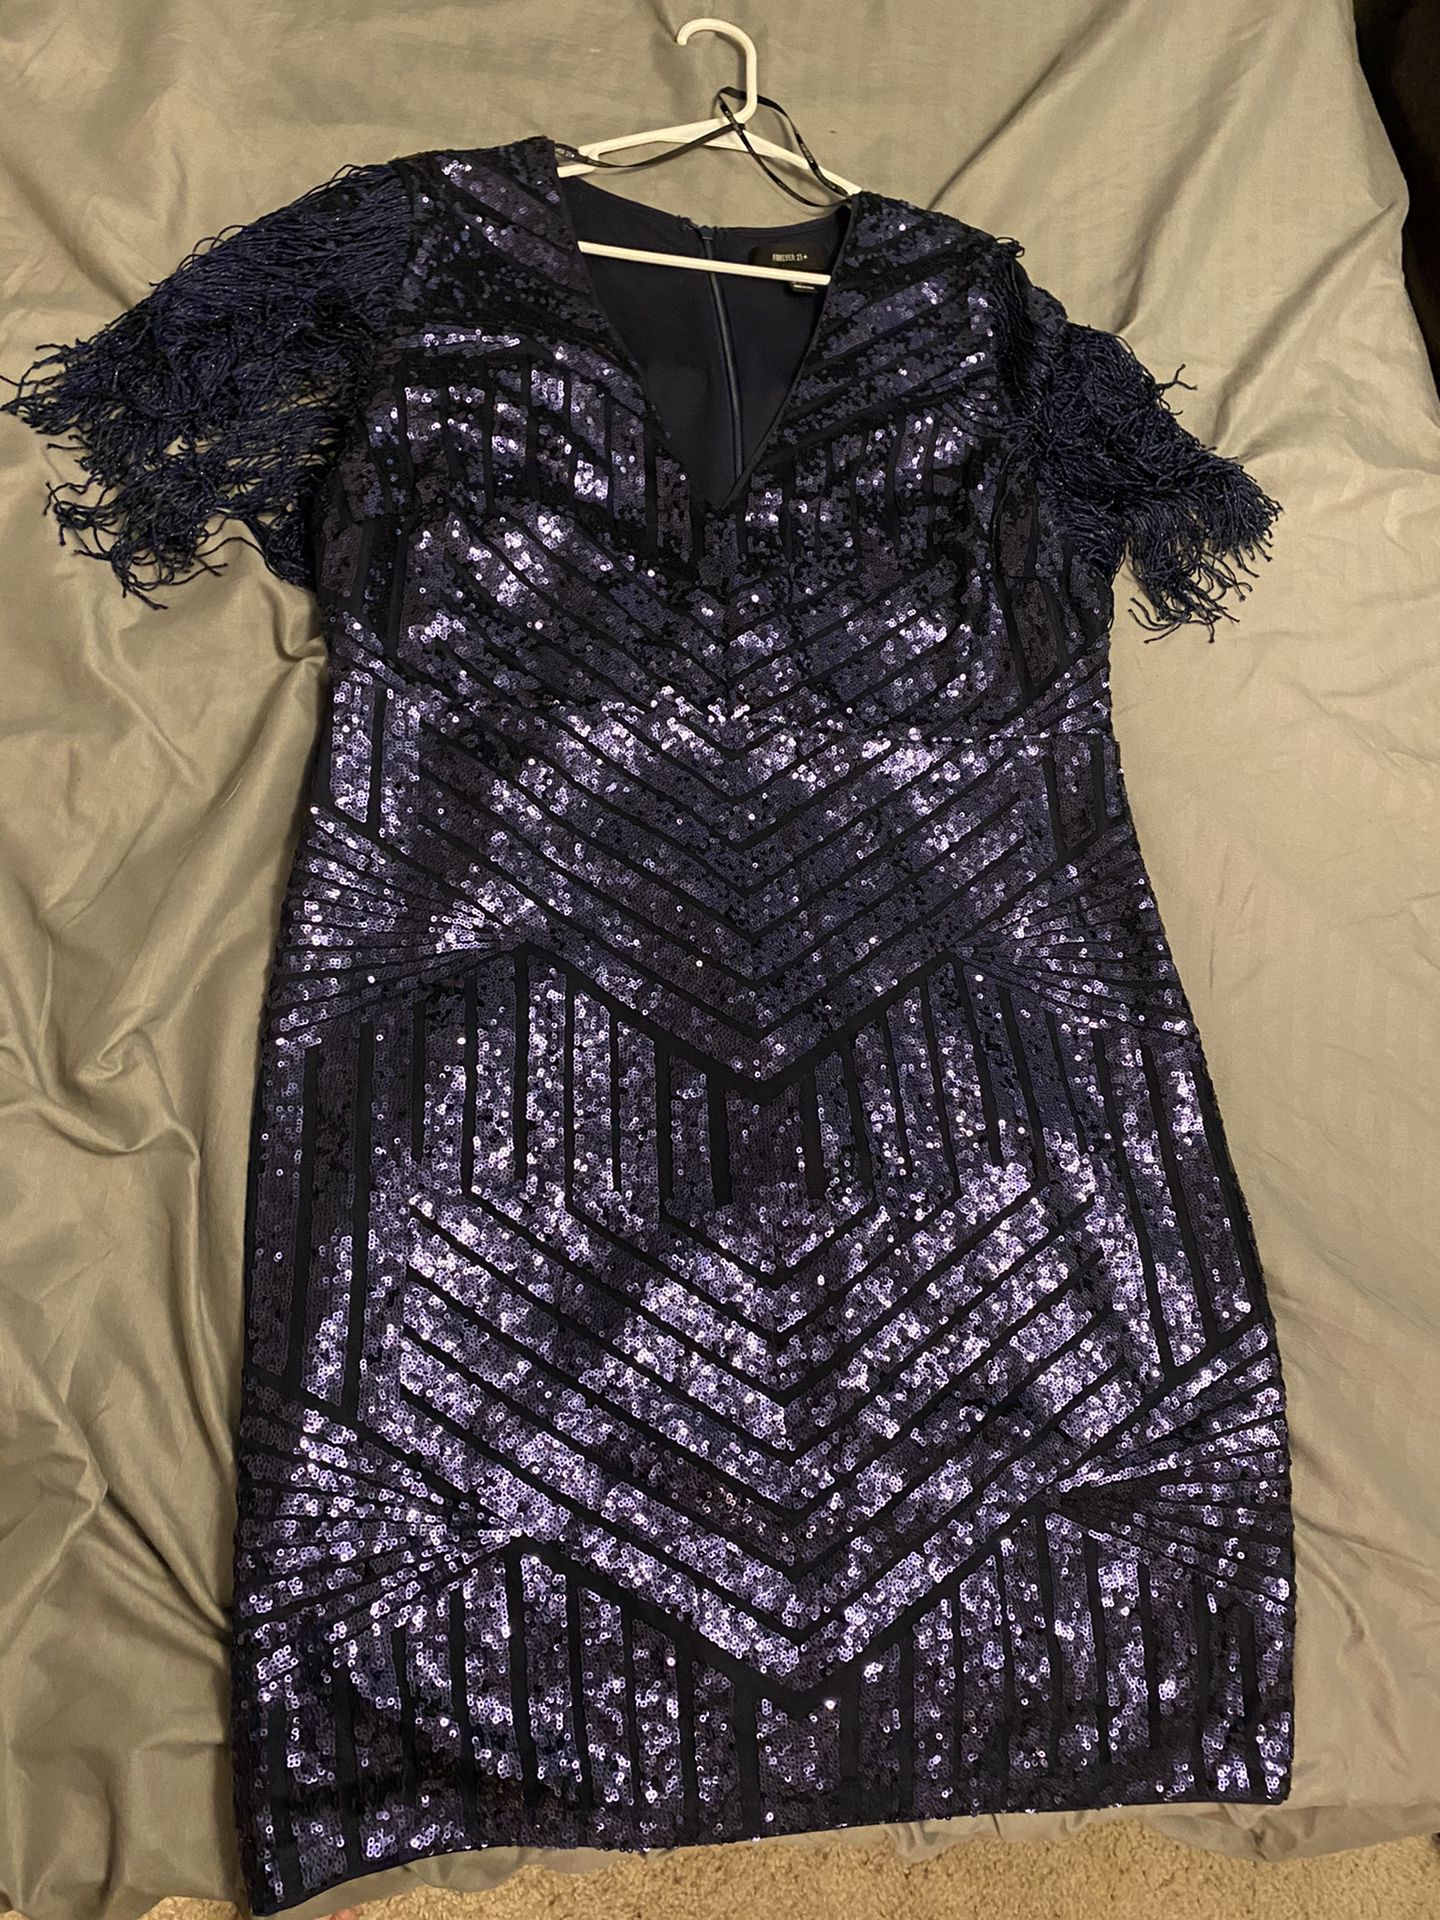 Navy special occasion dress size 2X